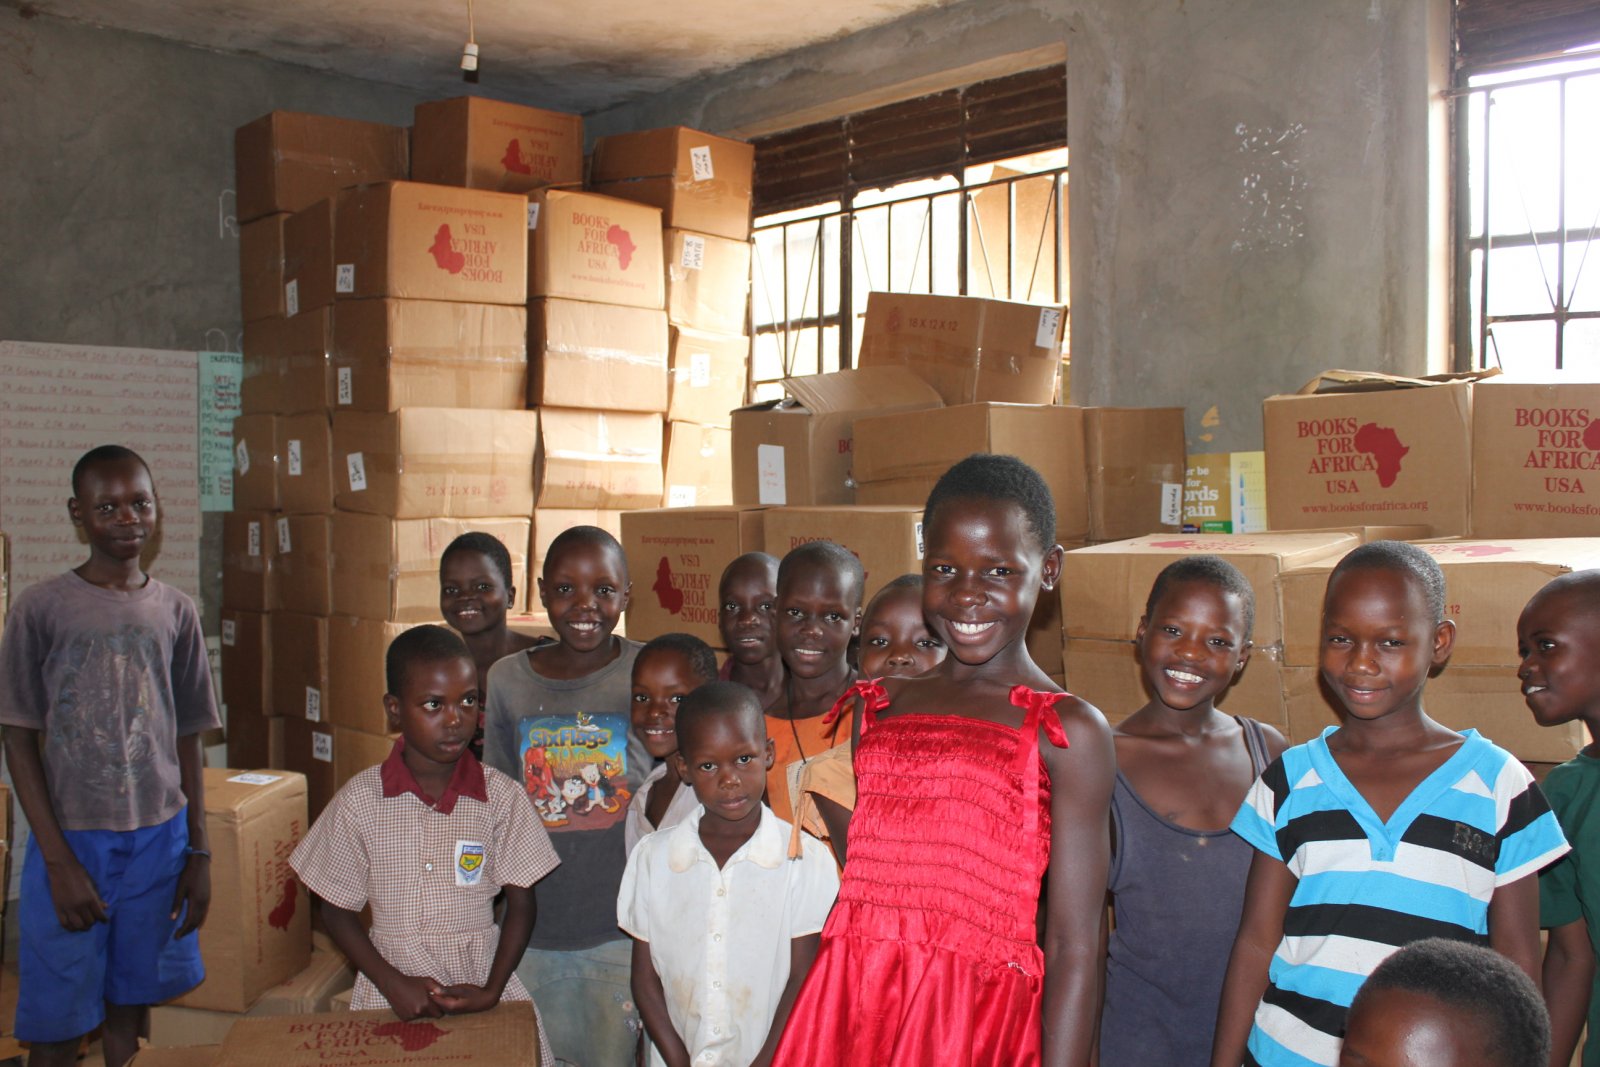 Students of St.Jude Primary school Pallisa receive Books. Pallisa District is one of the most affected in Uganda with high rates of Child Marriage